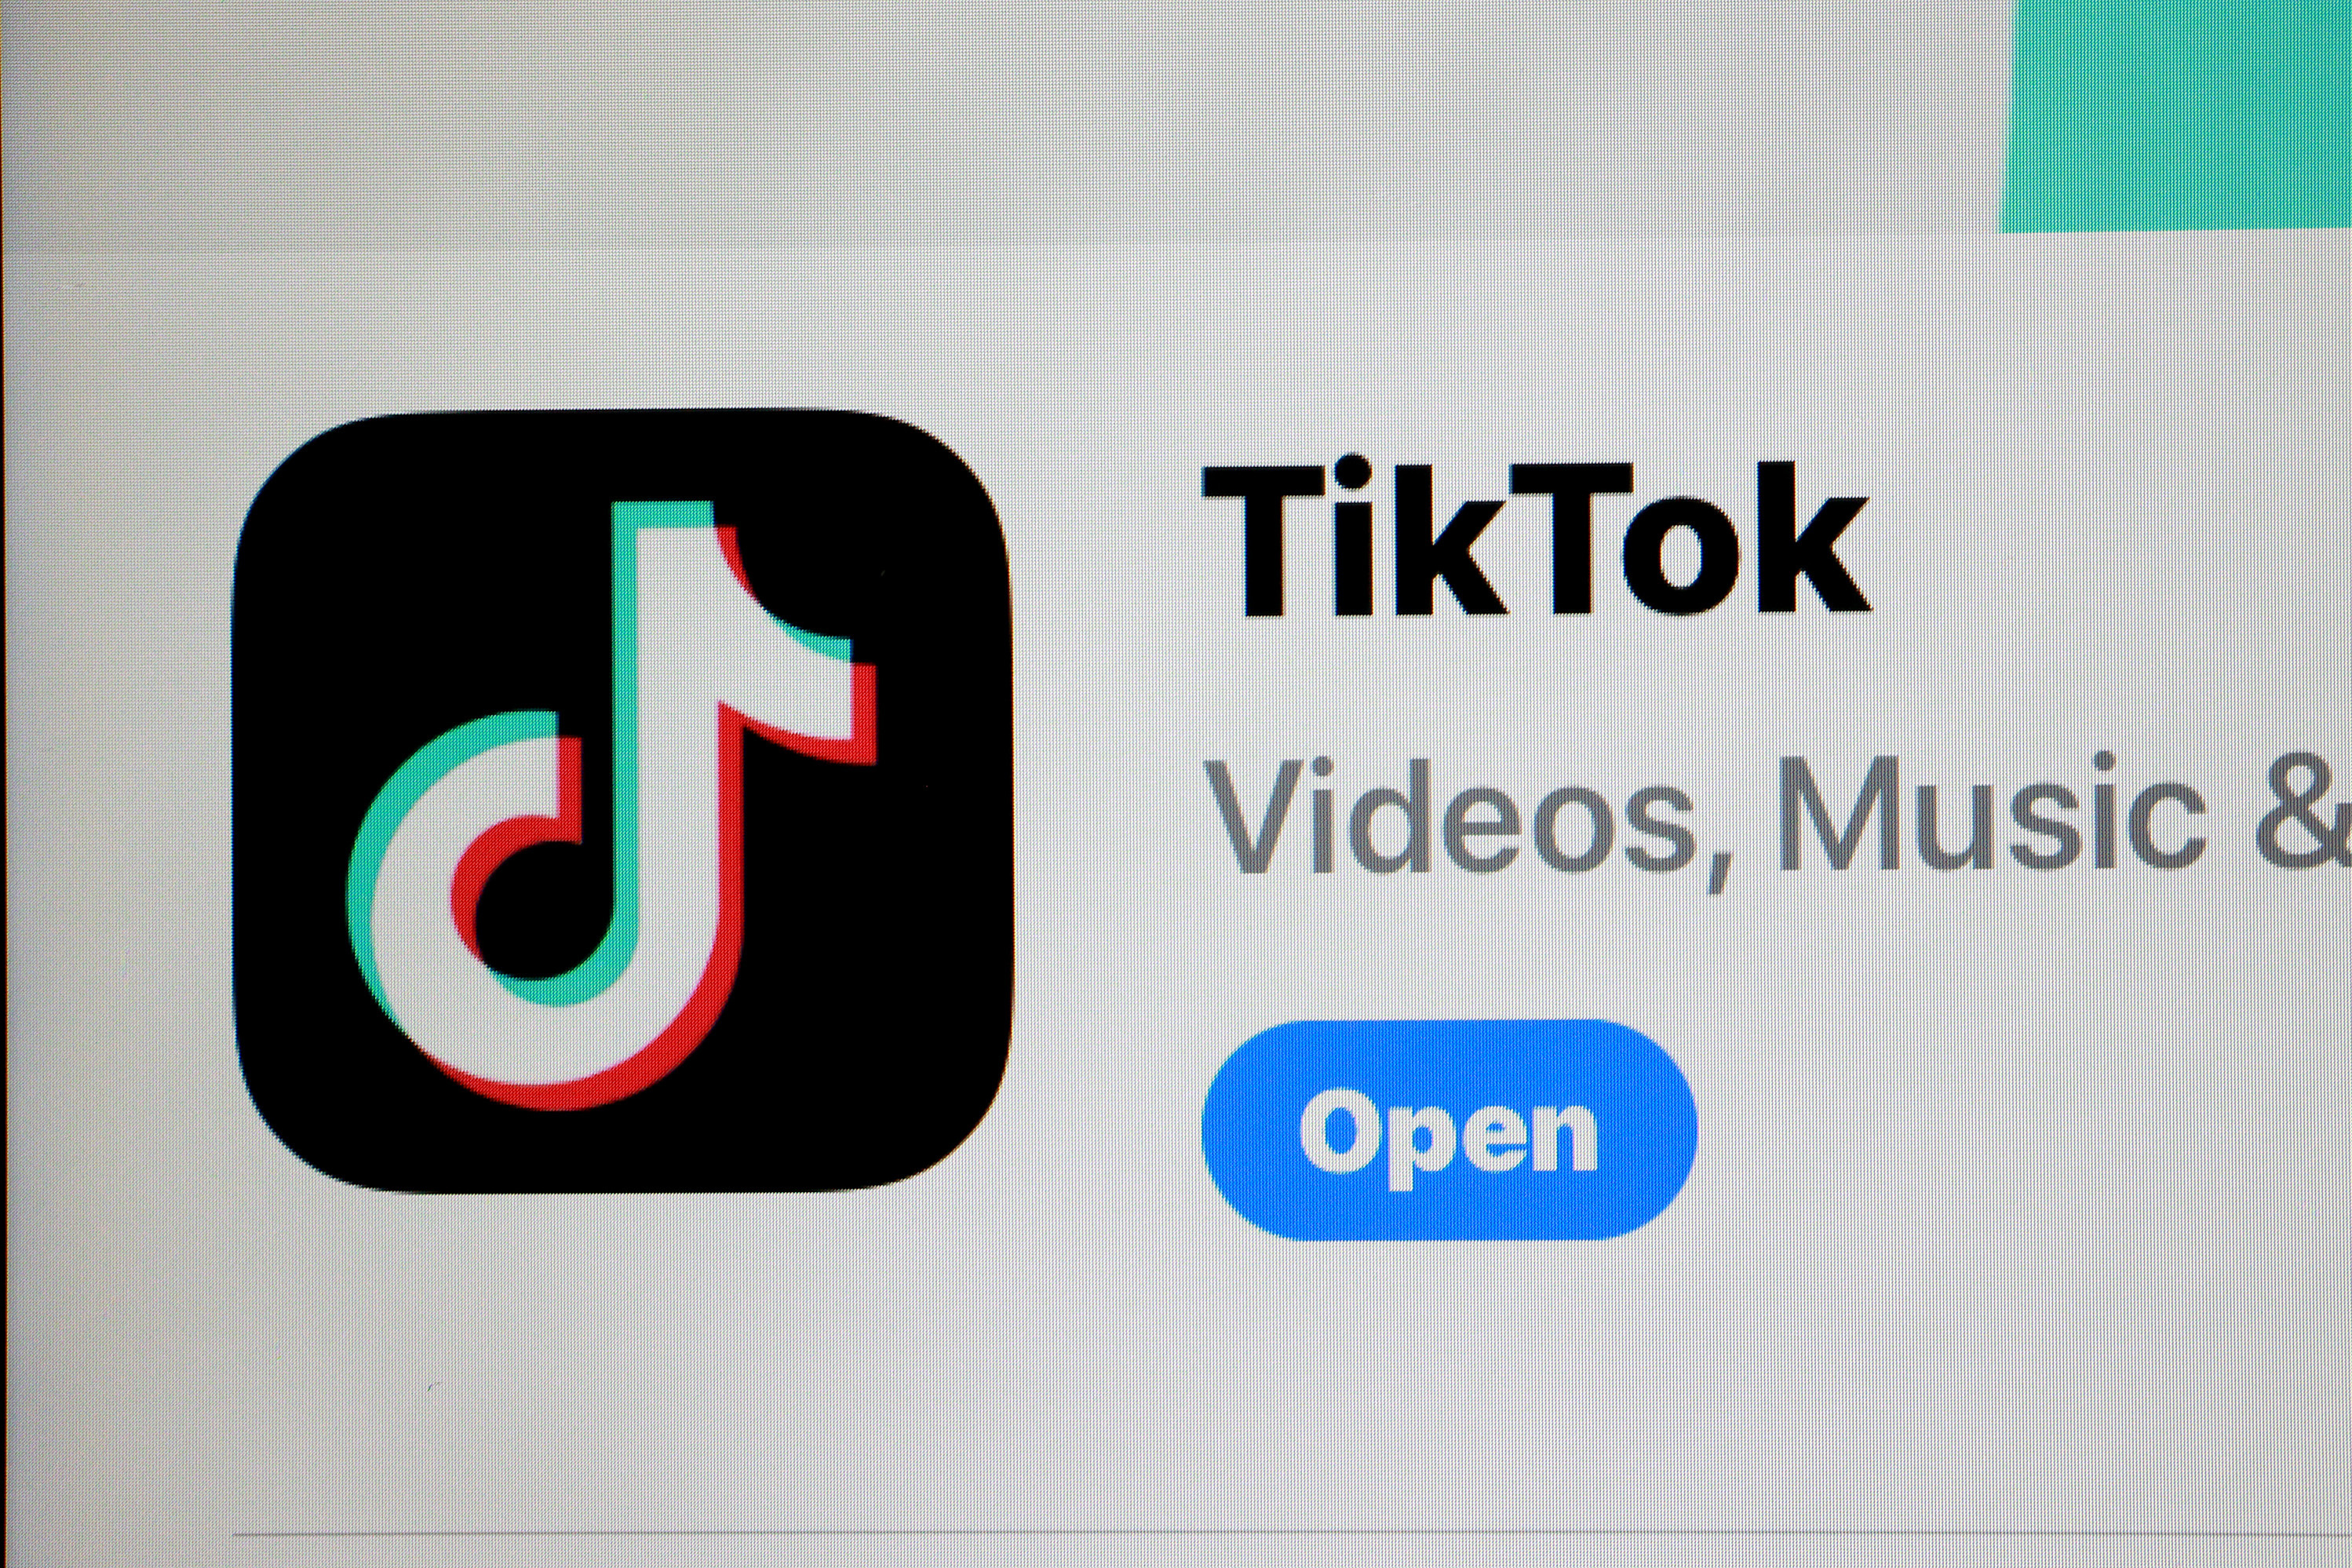 A newly signed law requires that the Chinese-owned TikTok app be sold to satisfy national security concerns.